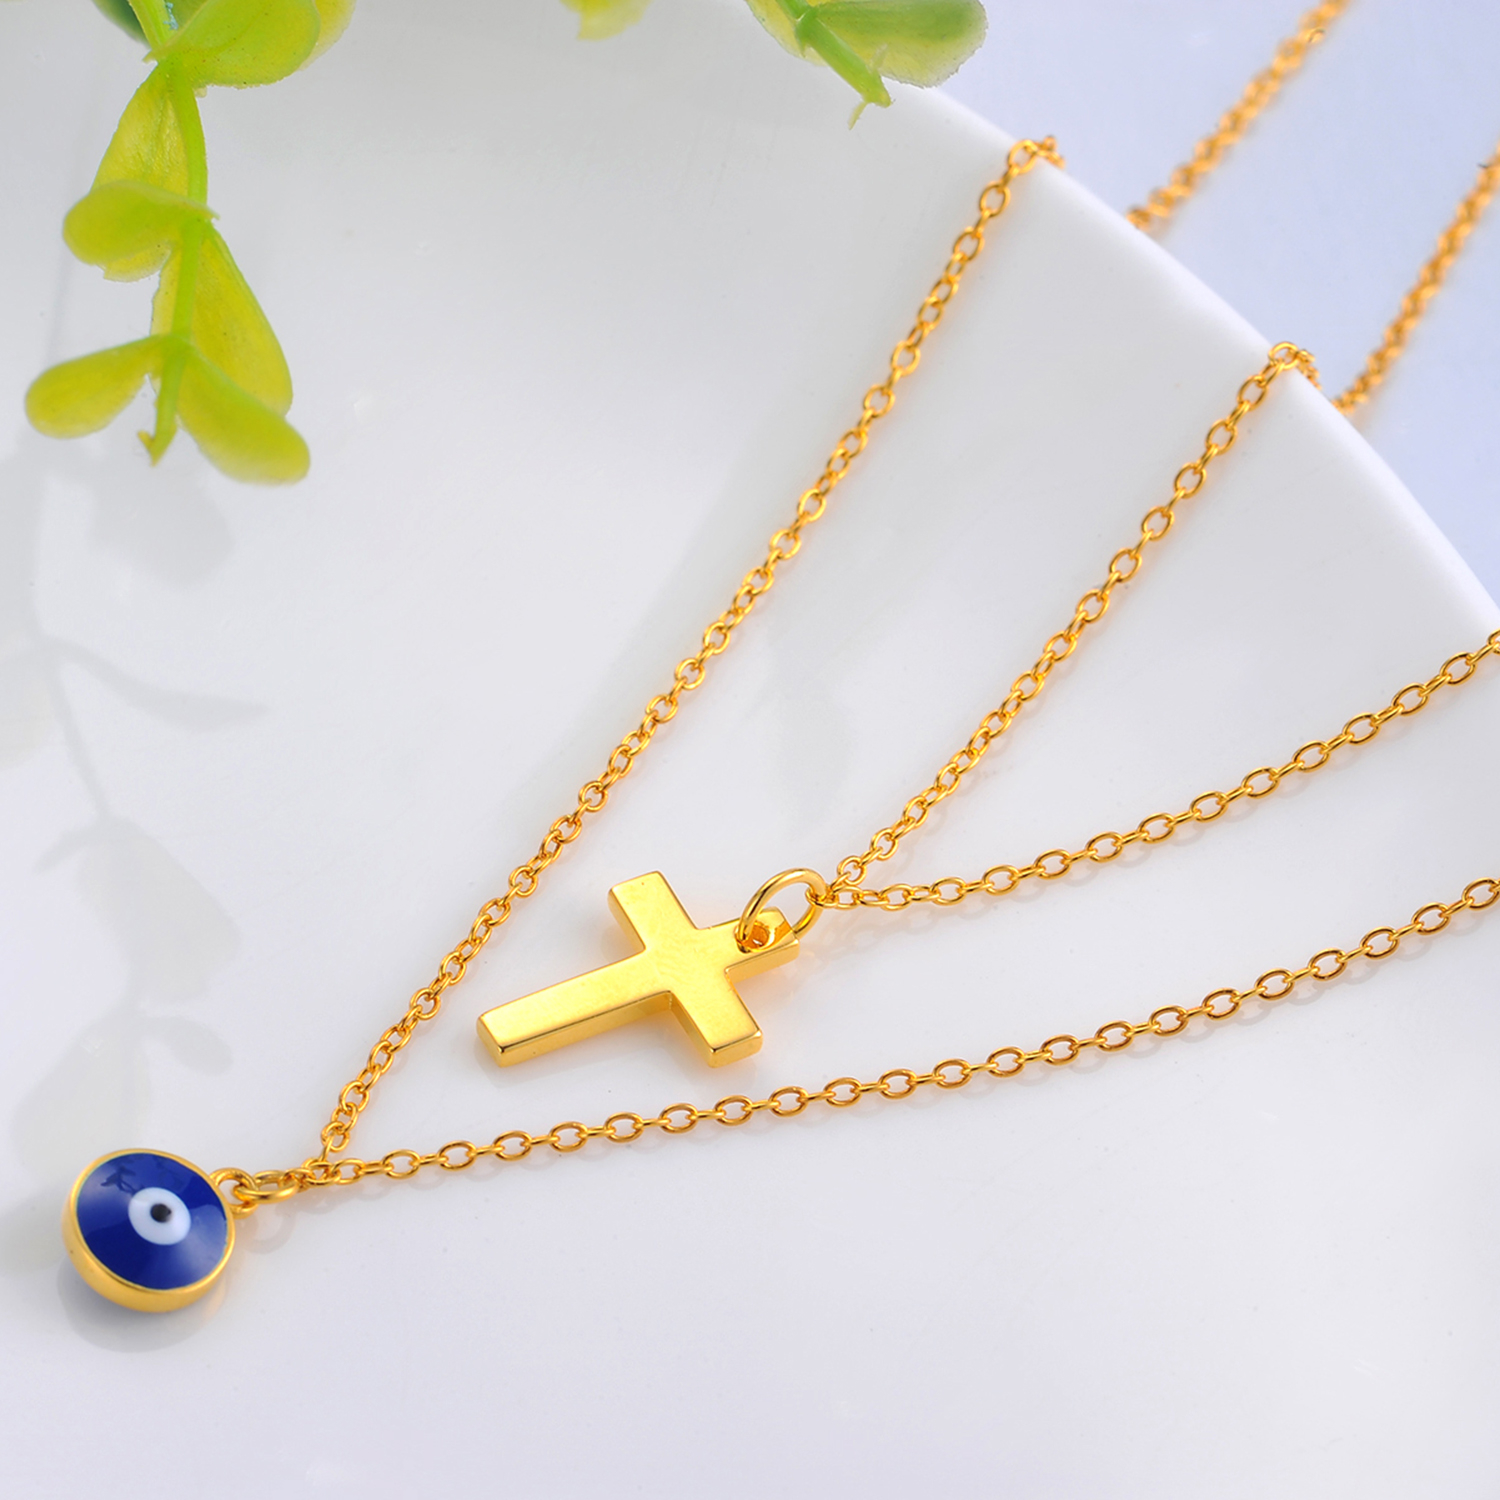 Wholesale 925 Sterling Silver Women Layered Cross Pendant Necklace Gold Plated Jewelry Set(图4)